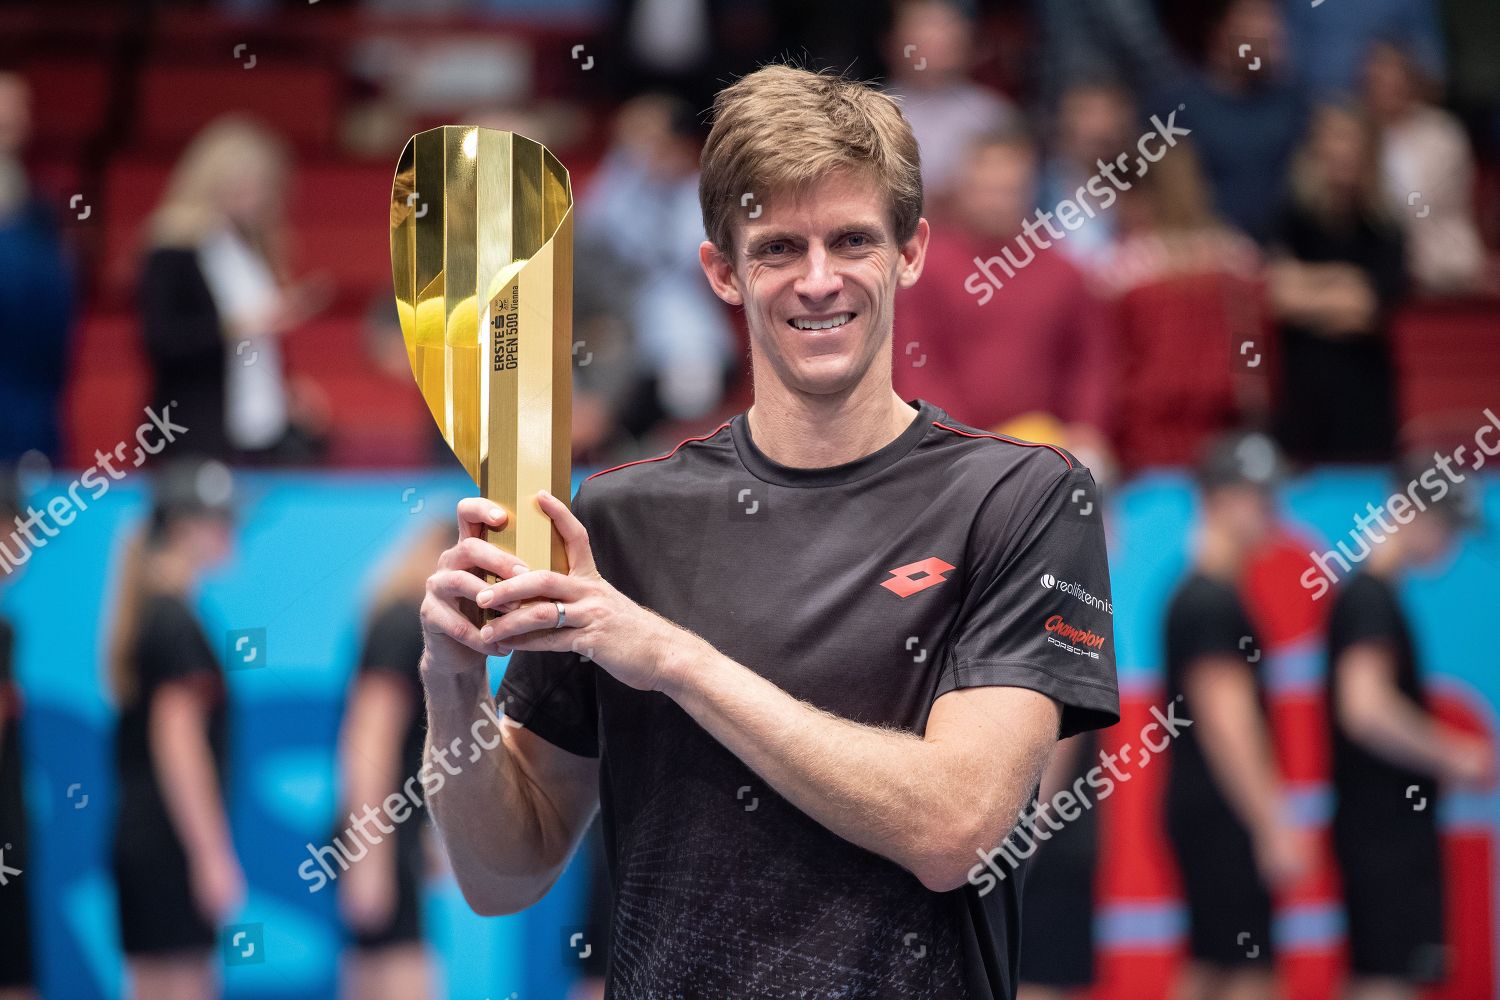 Kevin Anderson South Africa raises trophy after Editorial Stock Photo -  Stock Image | Shutterstock